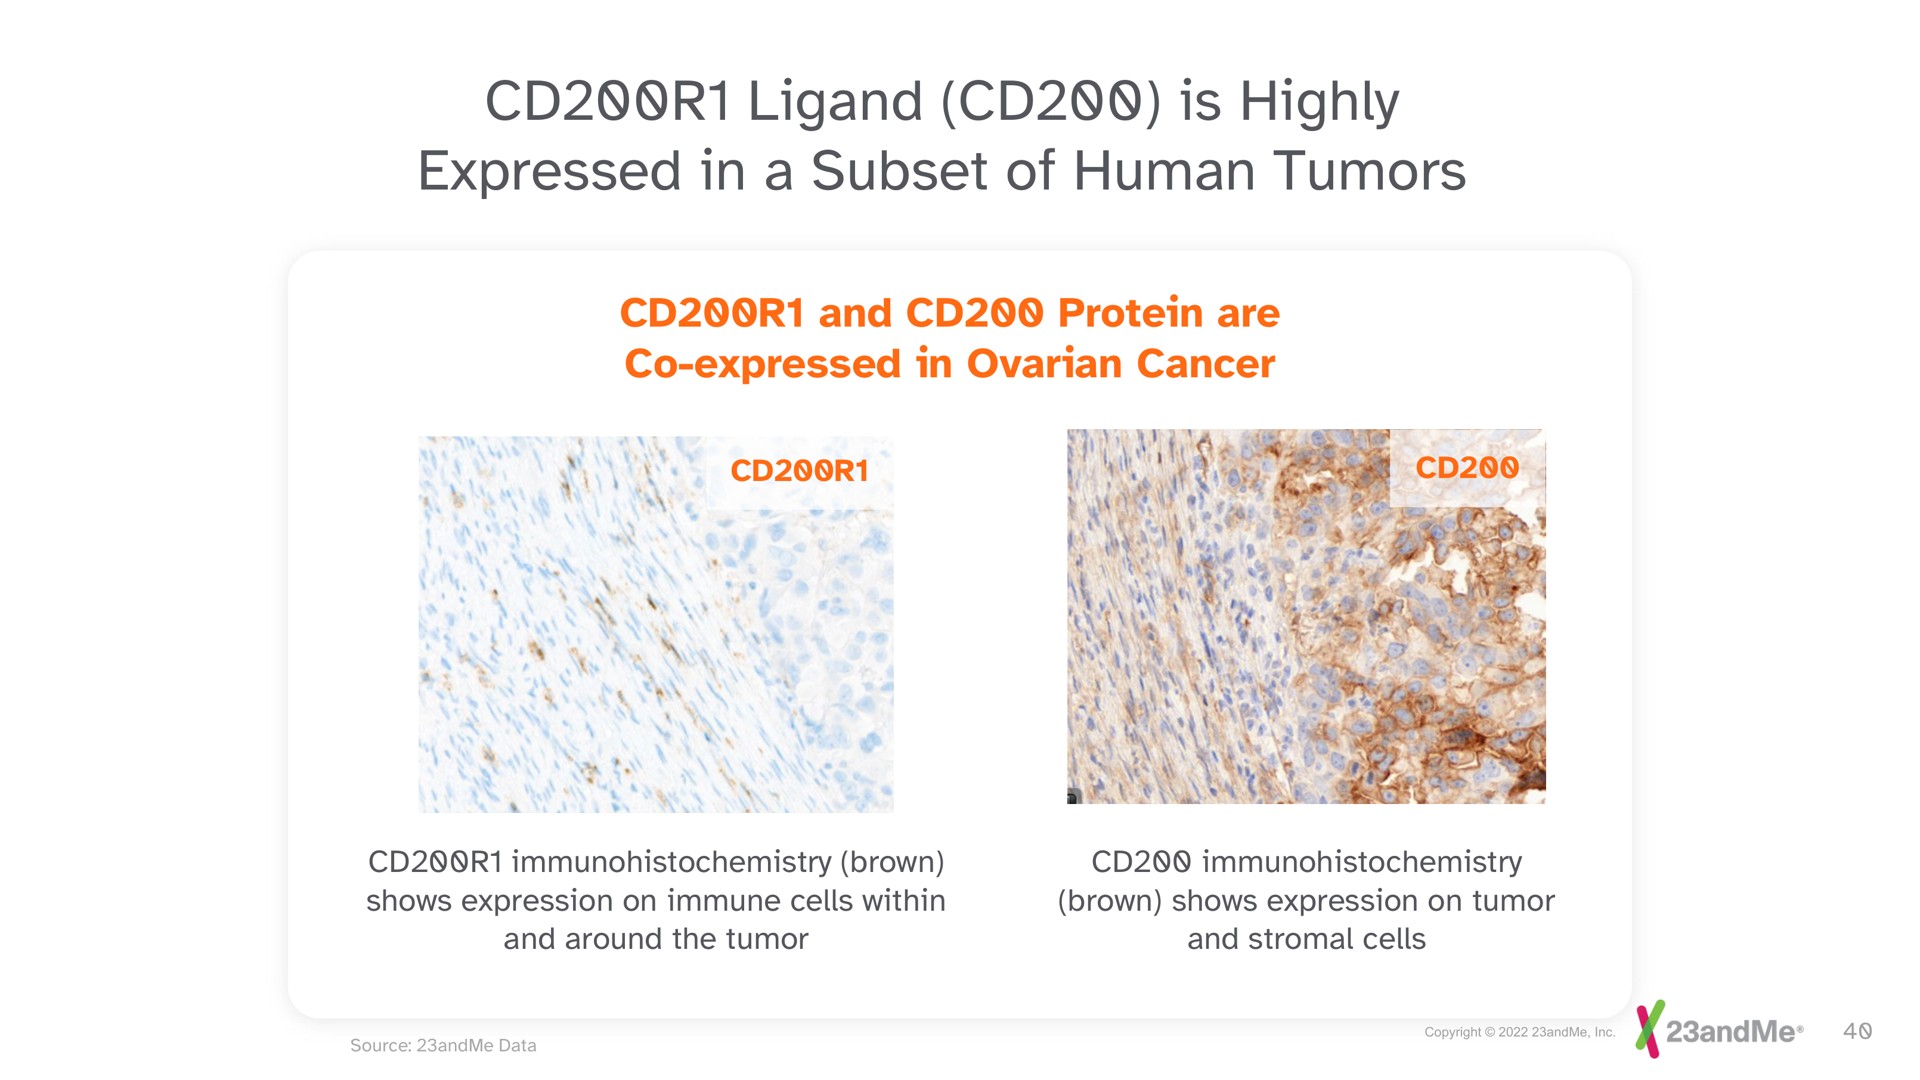 is highly expressed in a subset of human tumors | 23andMe